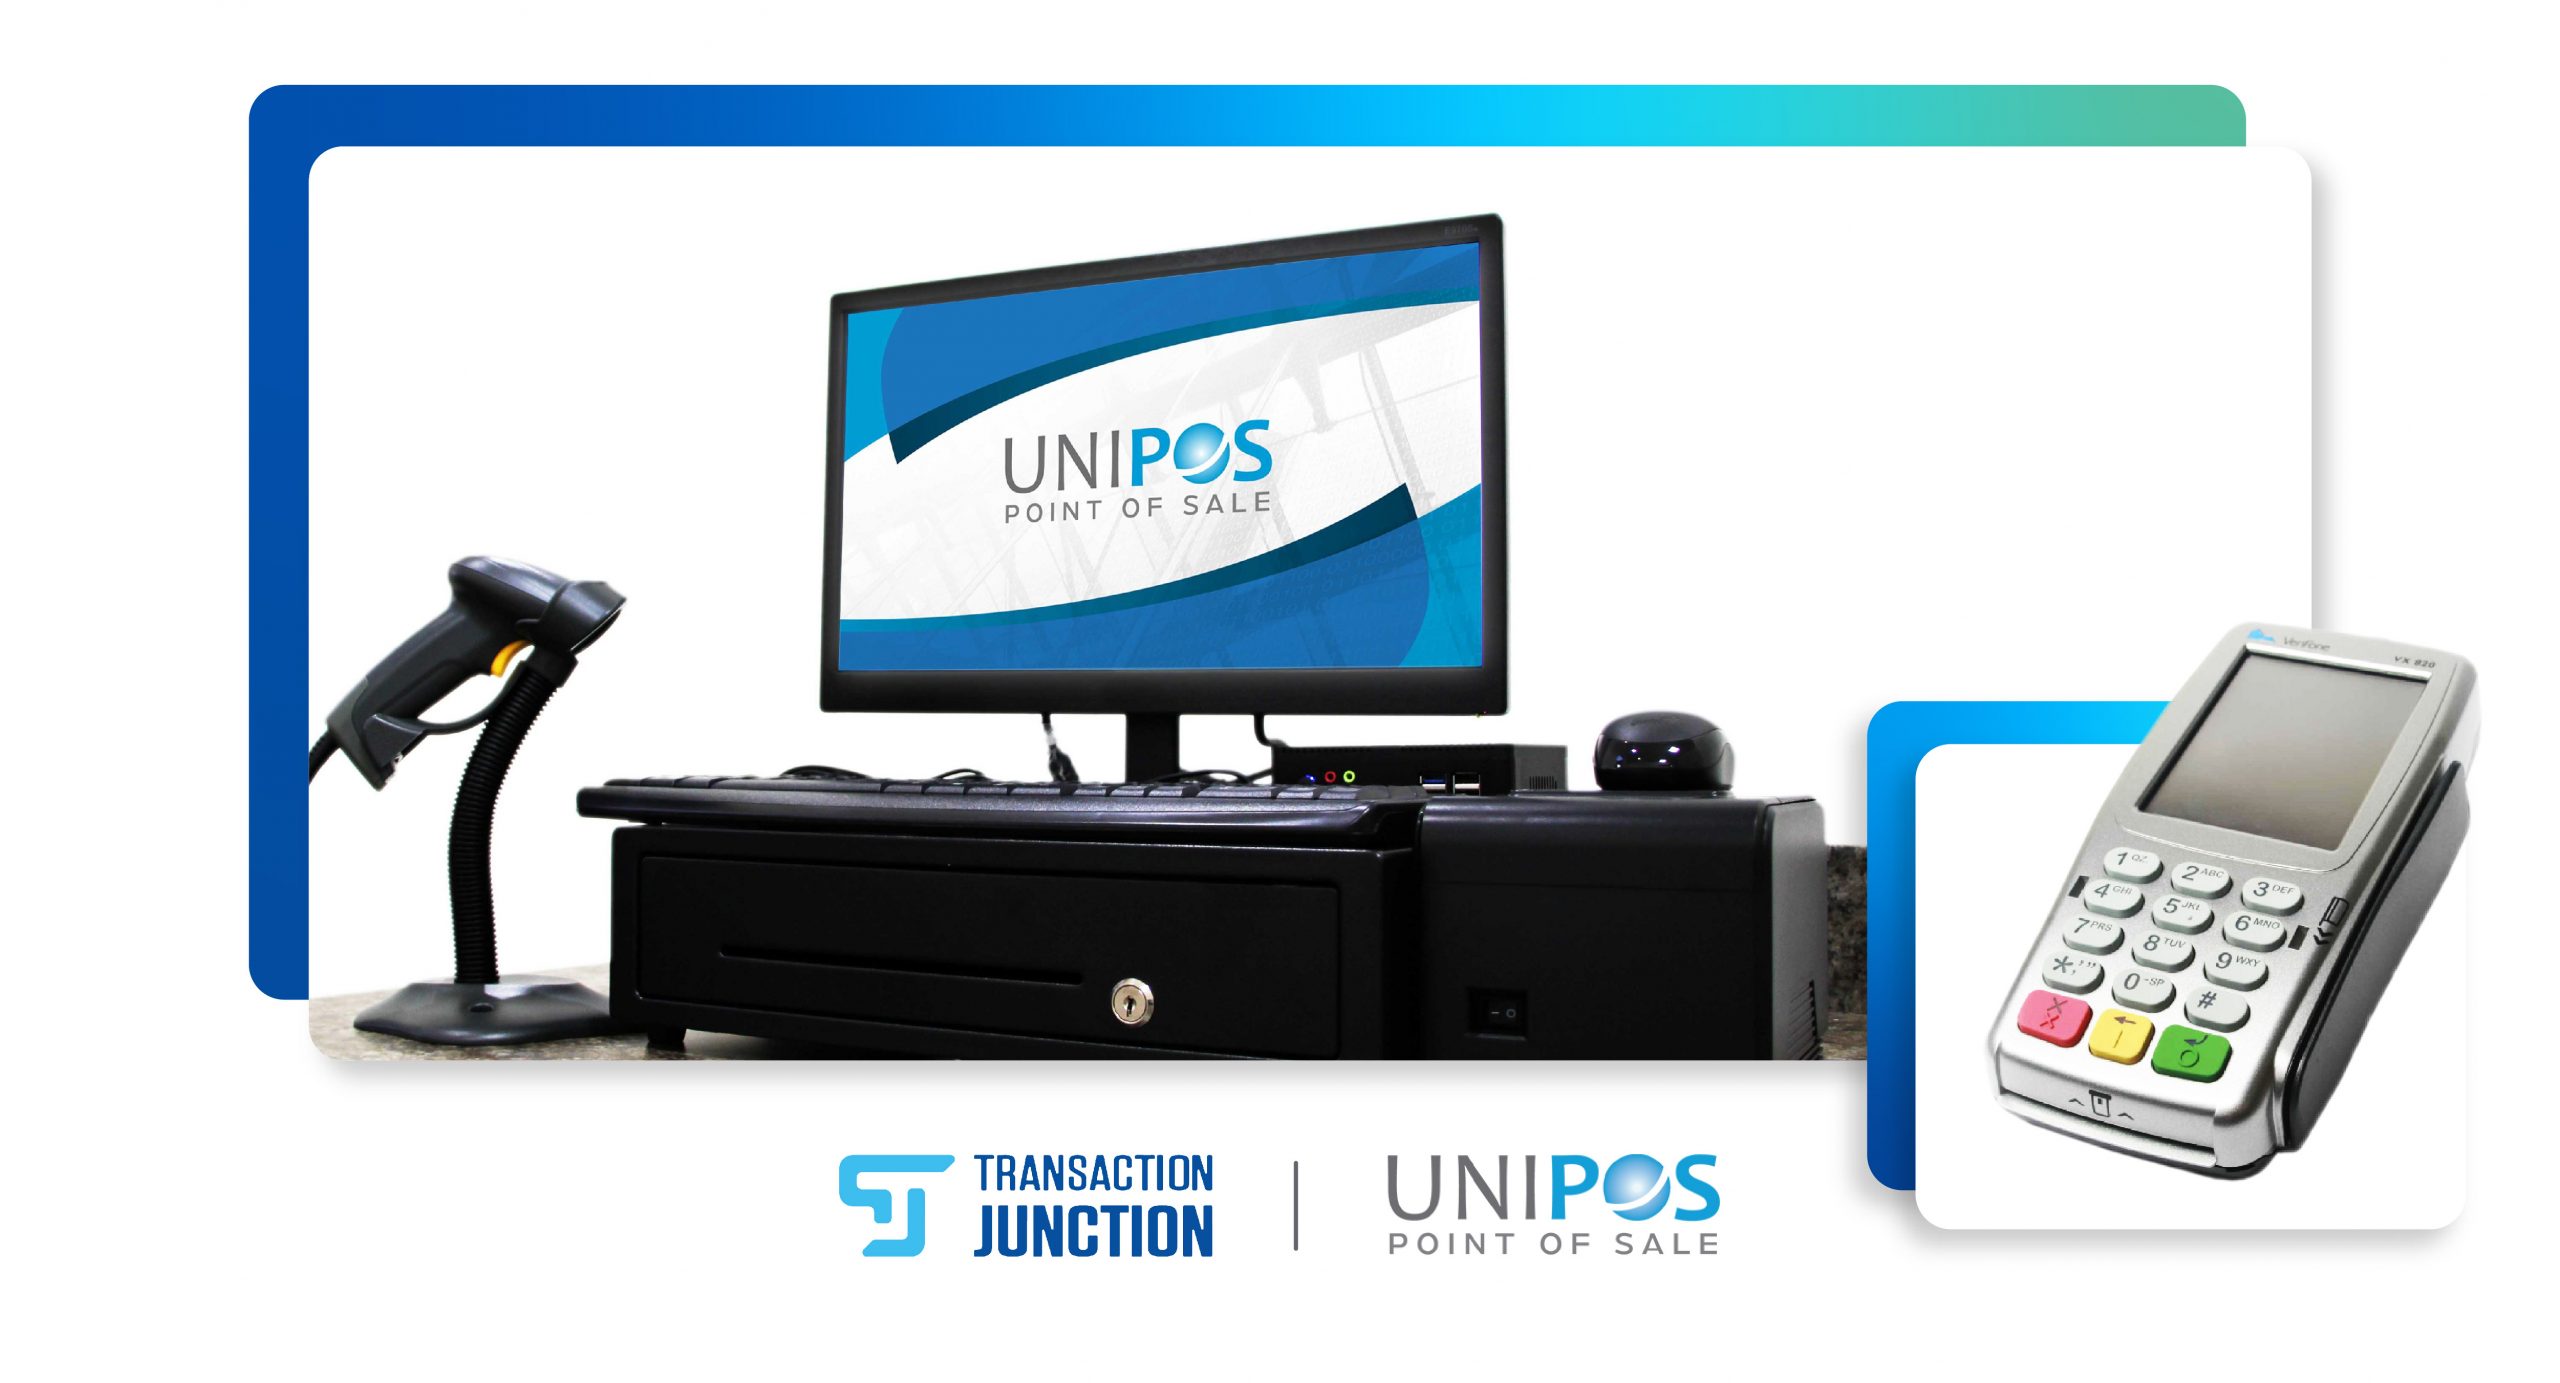 Unipos Point of Sale